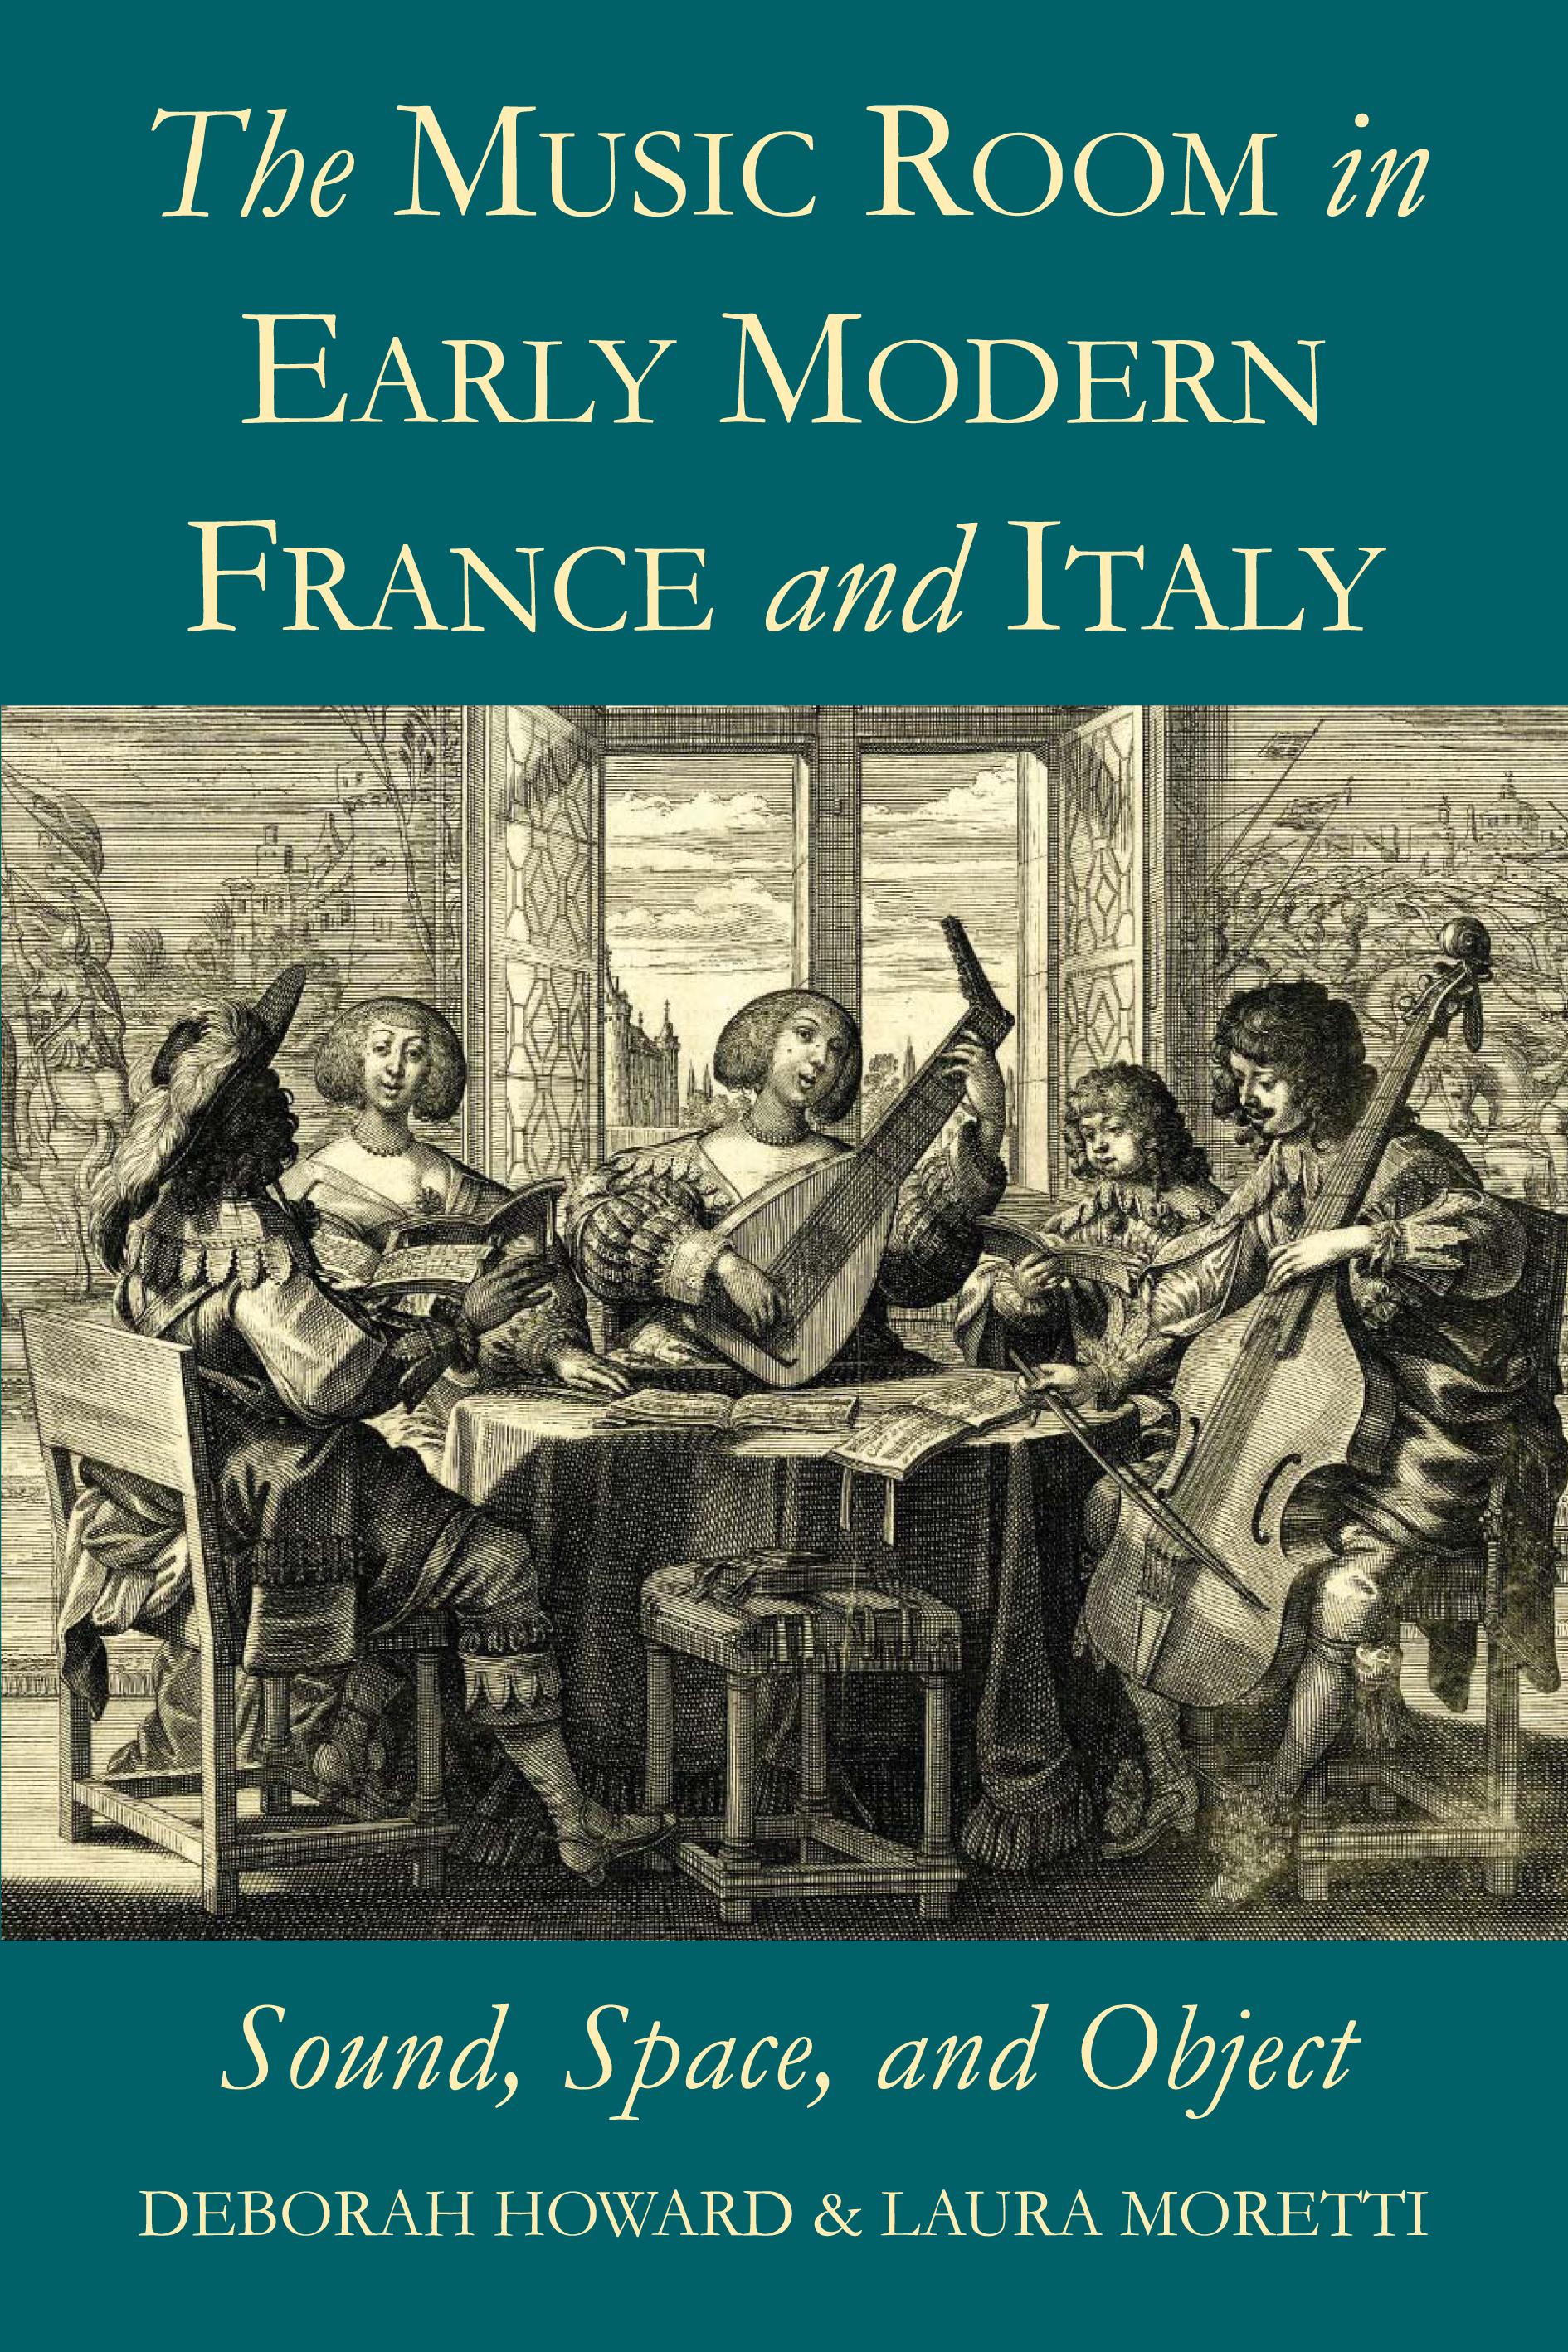 Professor Deborah Howard has co-edited a new book entitled "The Music Room in Early Modern France and Italy: Sound, Space and Object"